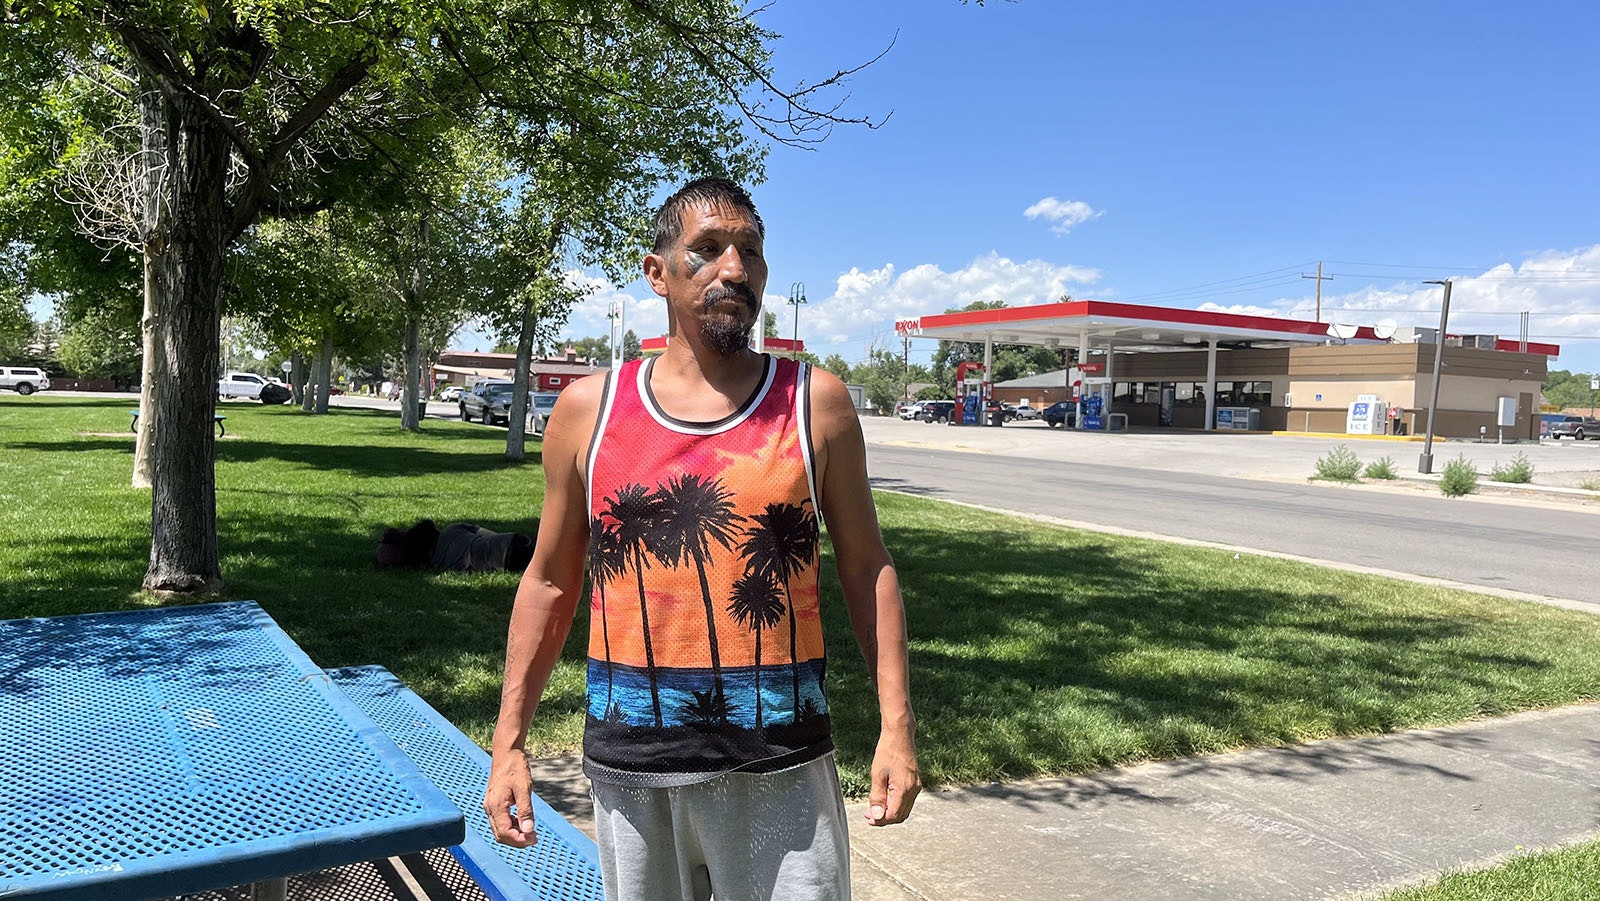 Patrick Arthur, who often drinks with others in Riverton’s public spaces, said he simply prefers a wanderer’s life, though it comes with hard times and tragedies.